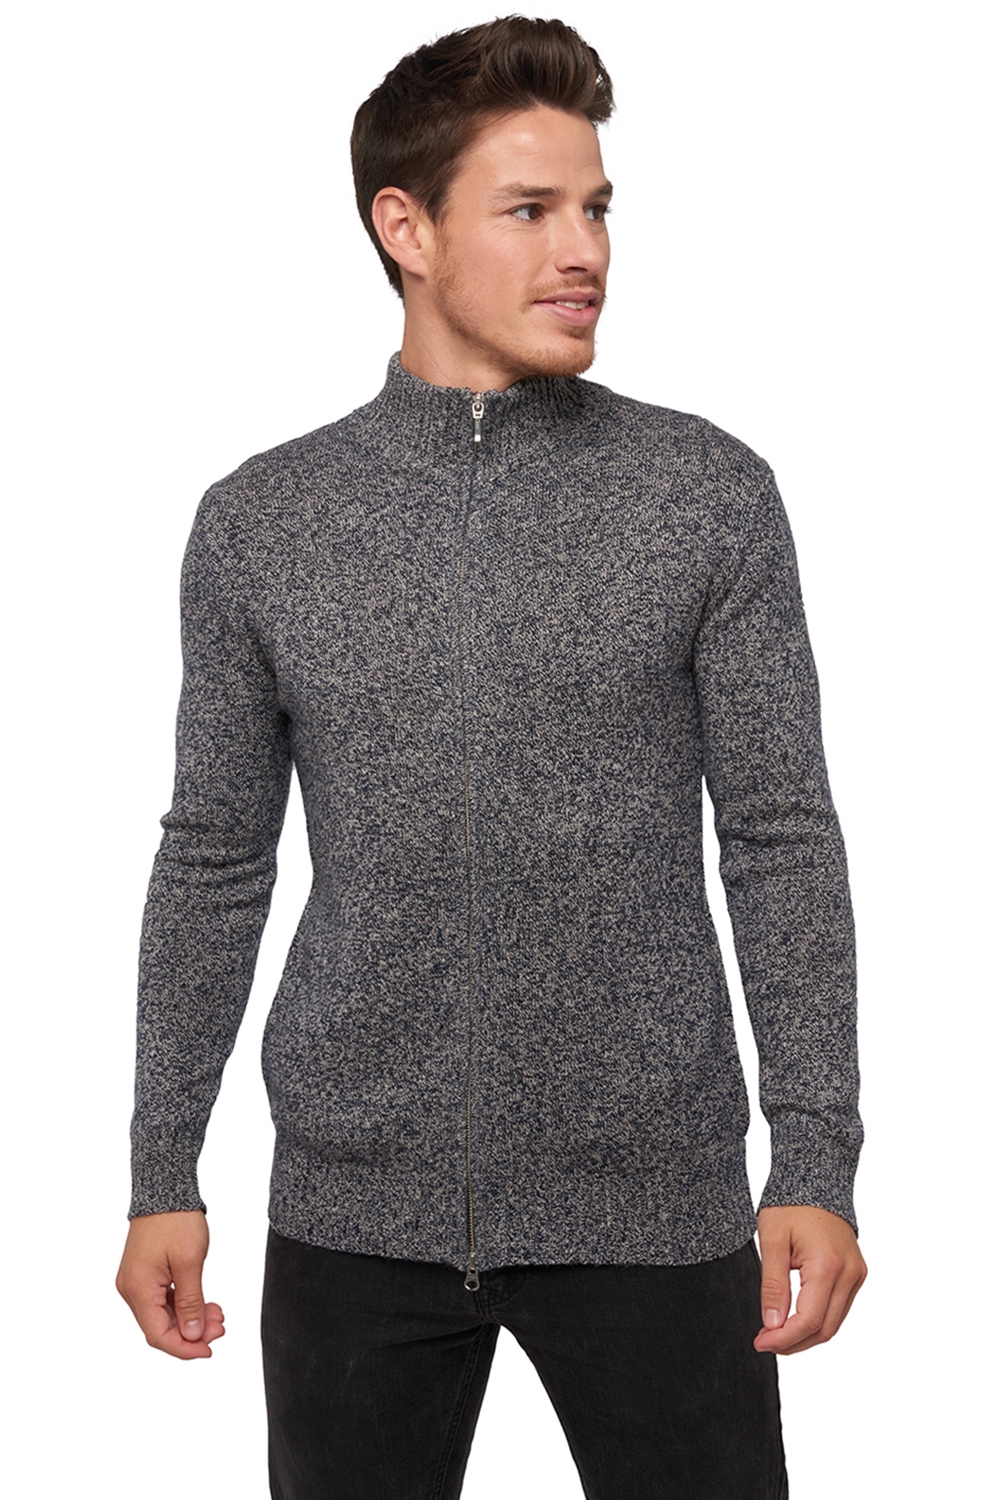 Chameau pull homme clyde voyage 3xl